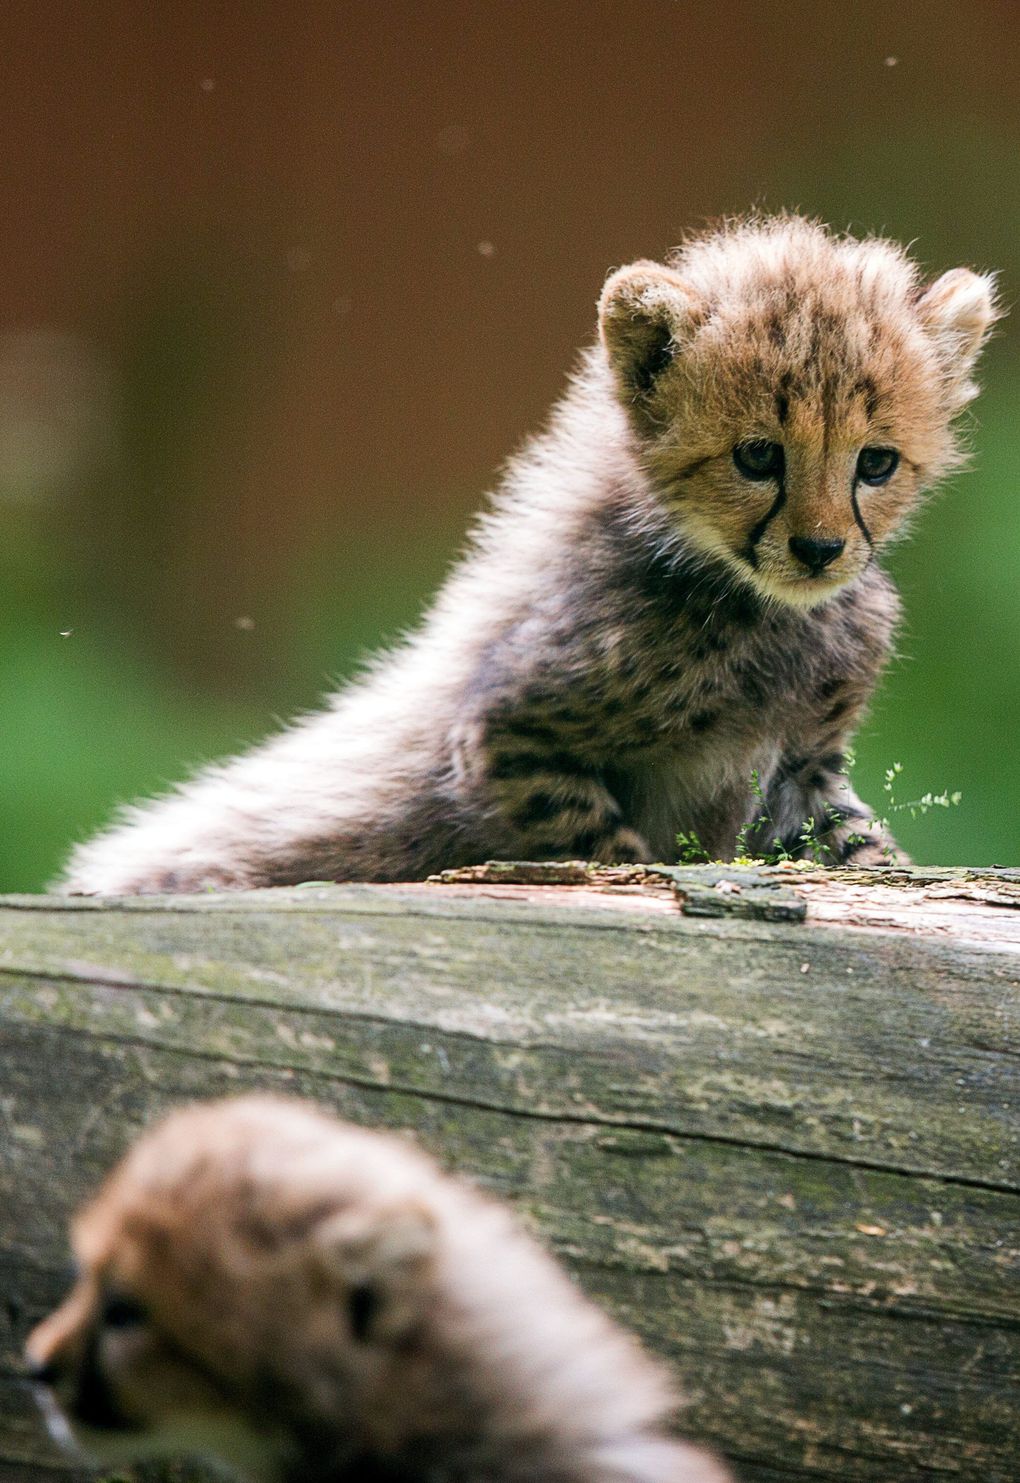 Our favorite cute animal photos from 2015 | The Seattle Times